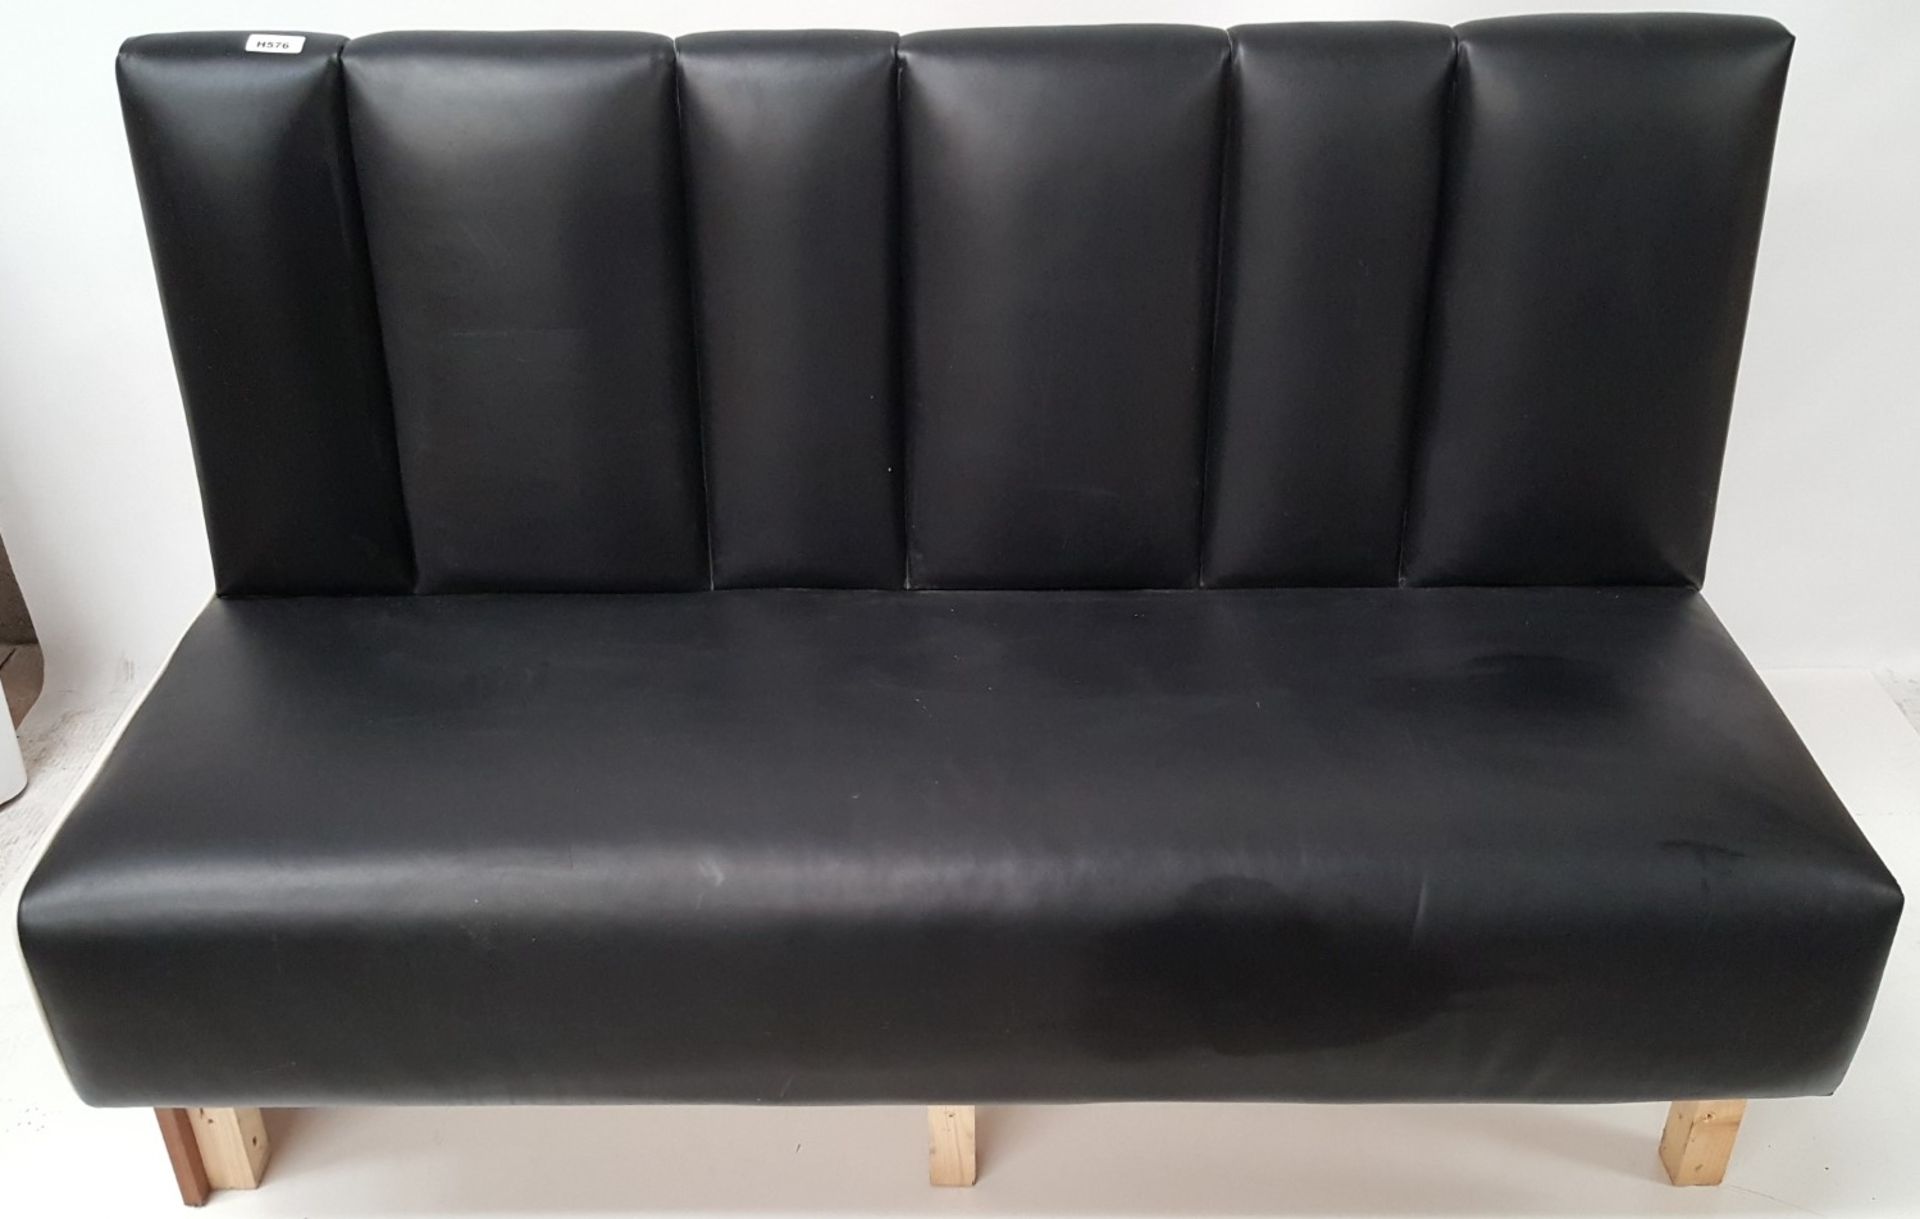 3 Pieces Of Black Upholstered Faux Leather Seating Booths - CL431 - Location: Altrincham WA14 - Image 15 of 19